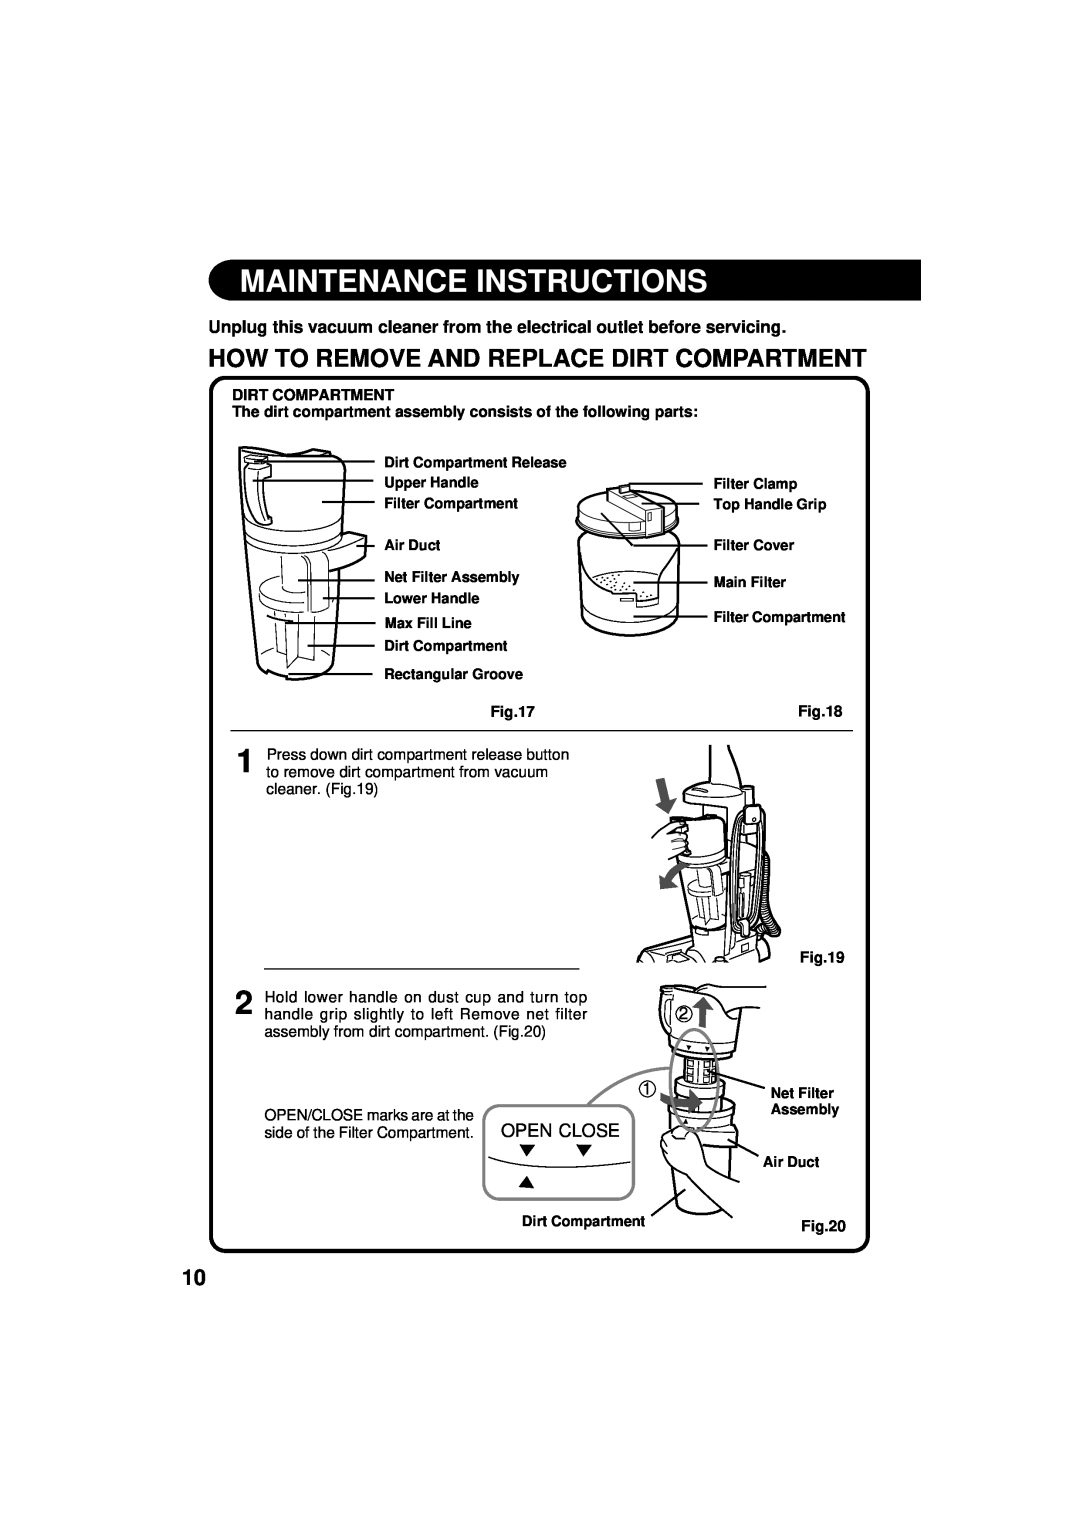 Sharp EC-S5170, EC-T5180A, EC-T5180B operation manual Maintenance Instructions, How To Remove And Replace Dirt Compartment 